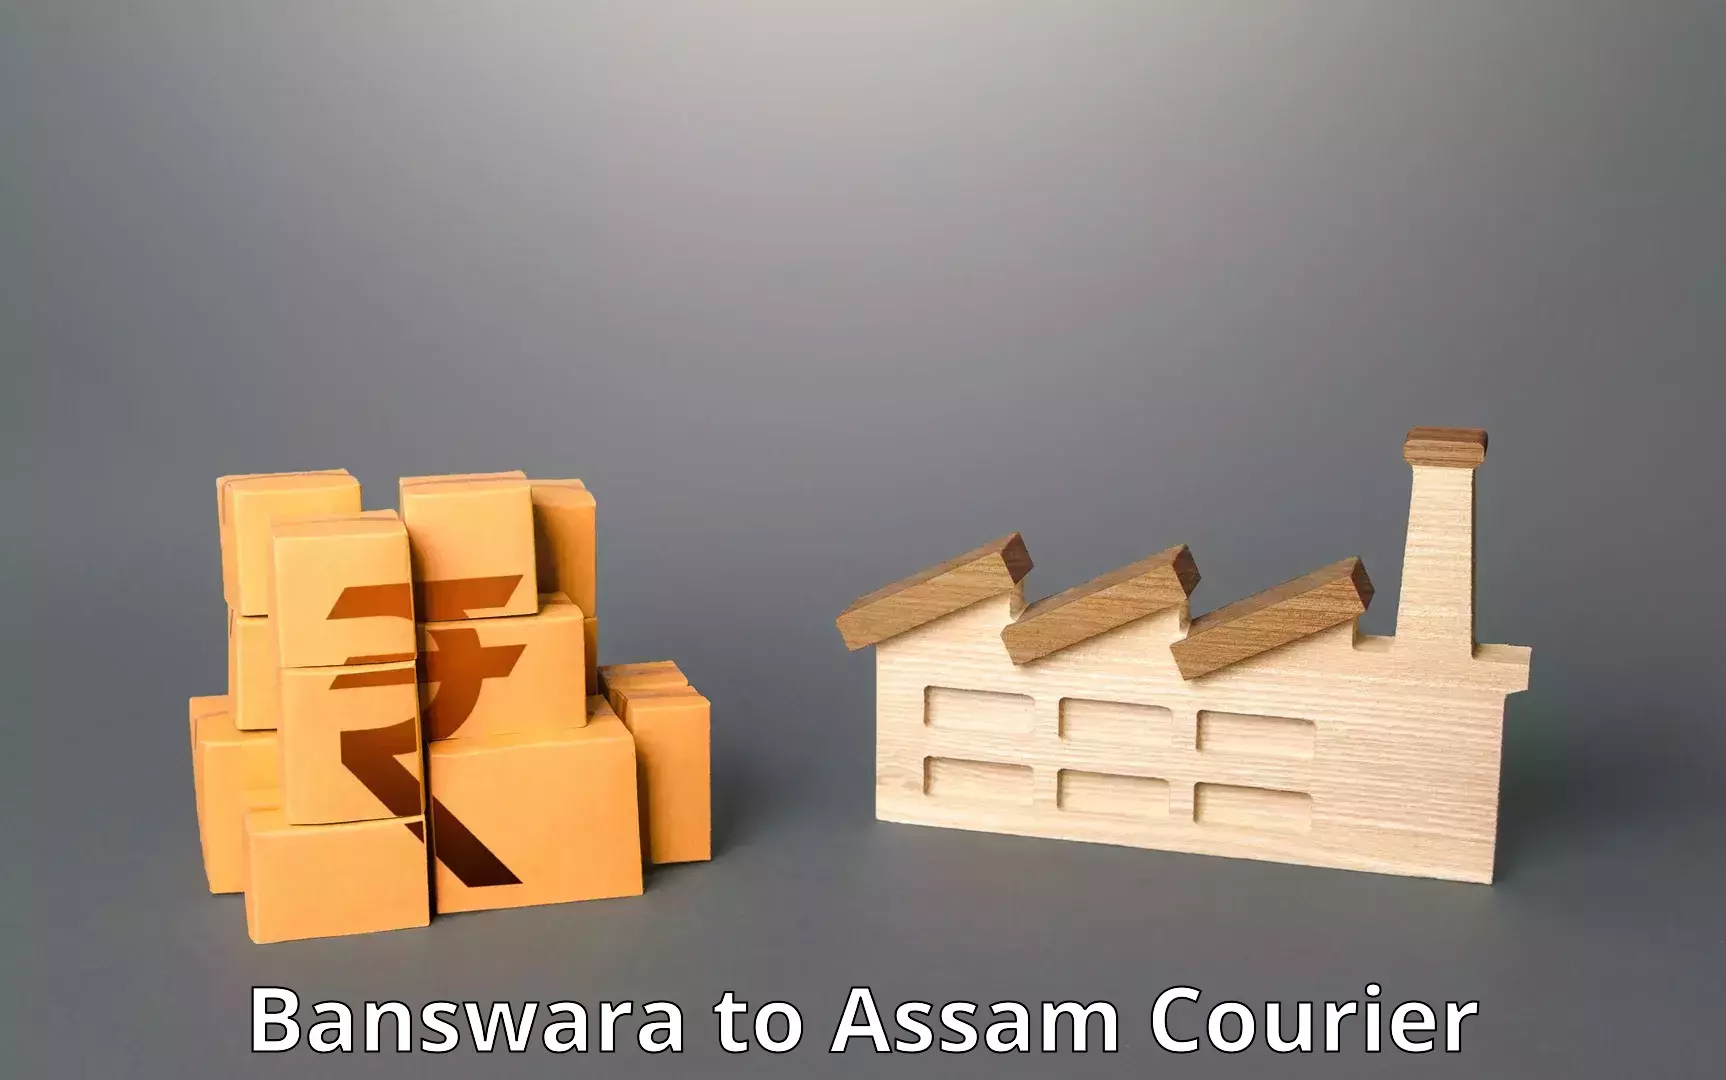 State-of-the-art courier technology Banswara to Pailapool